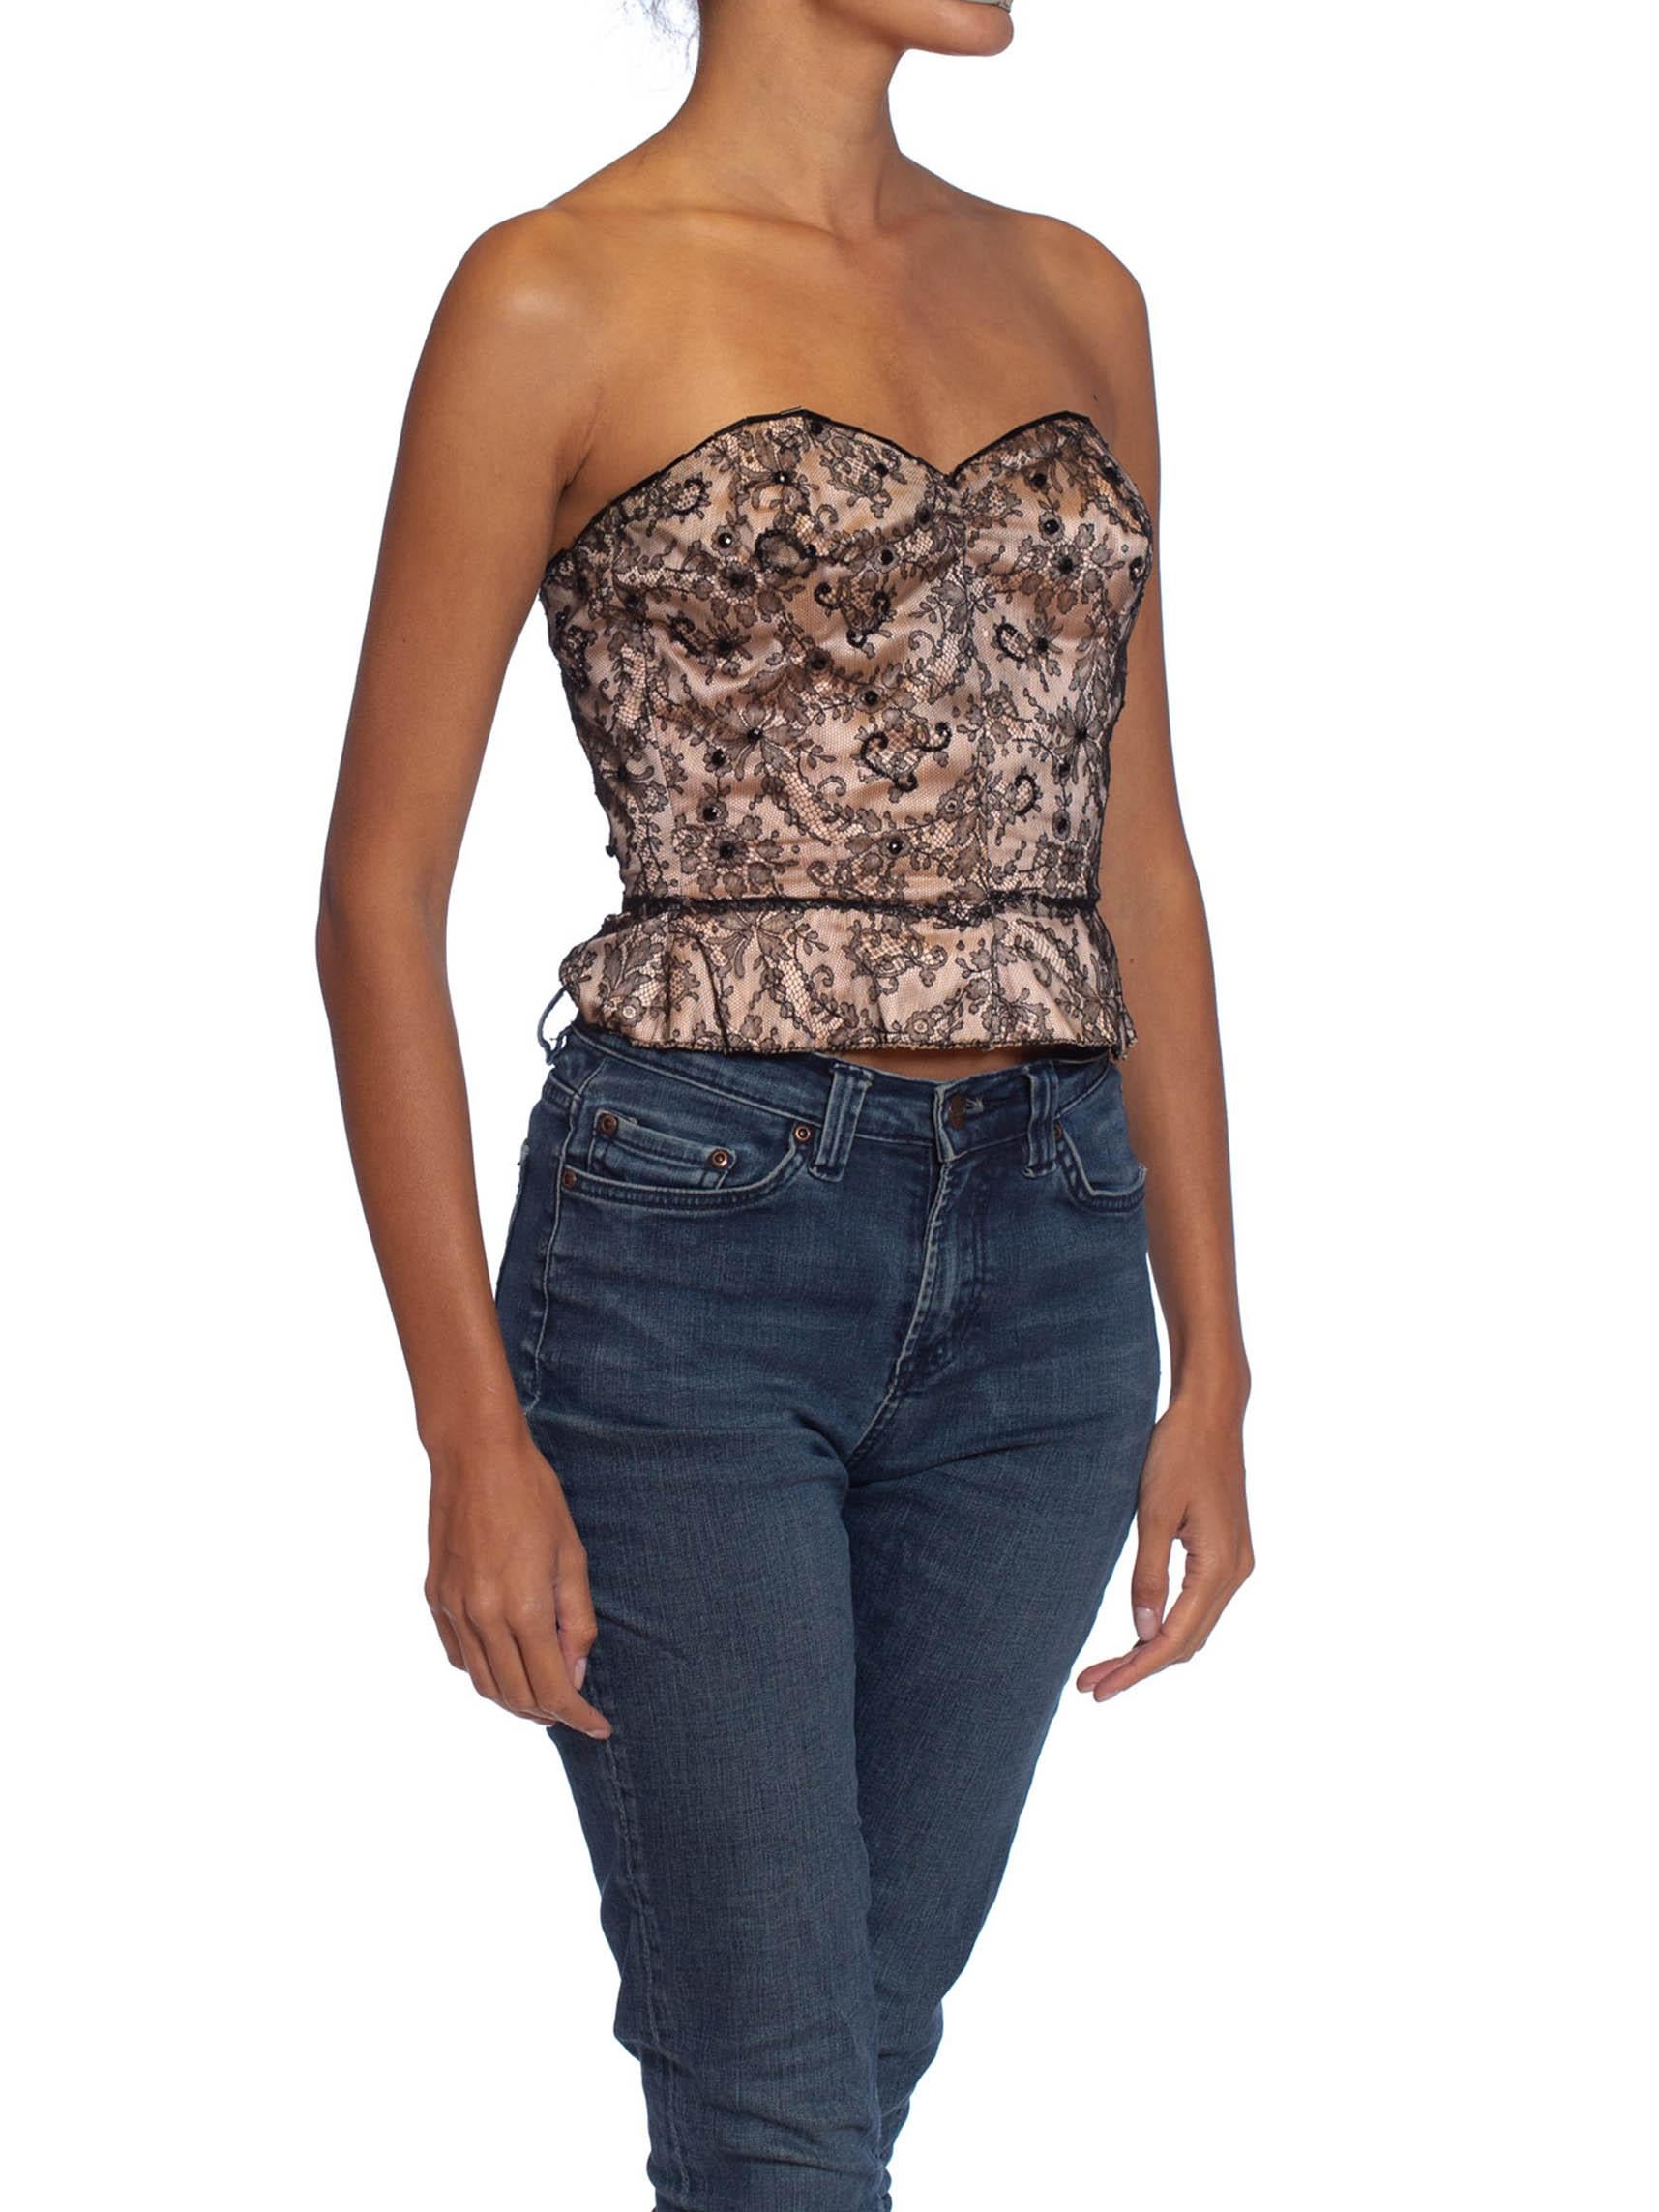 black lace strapless bustier